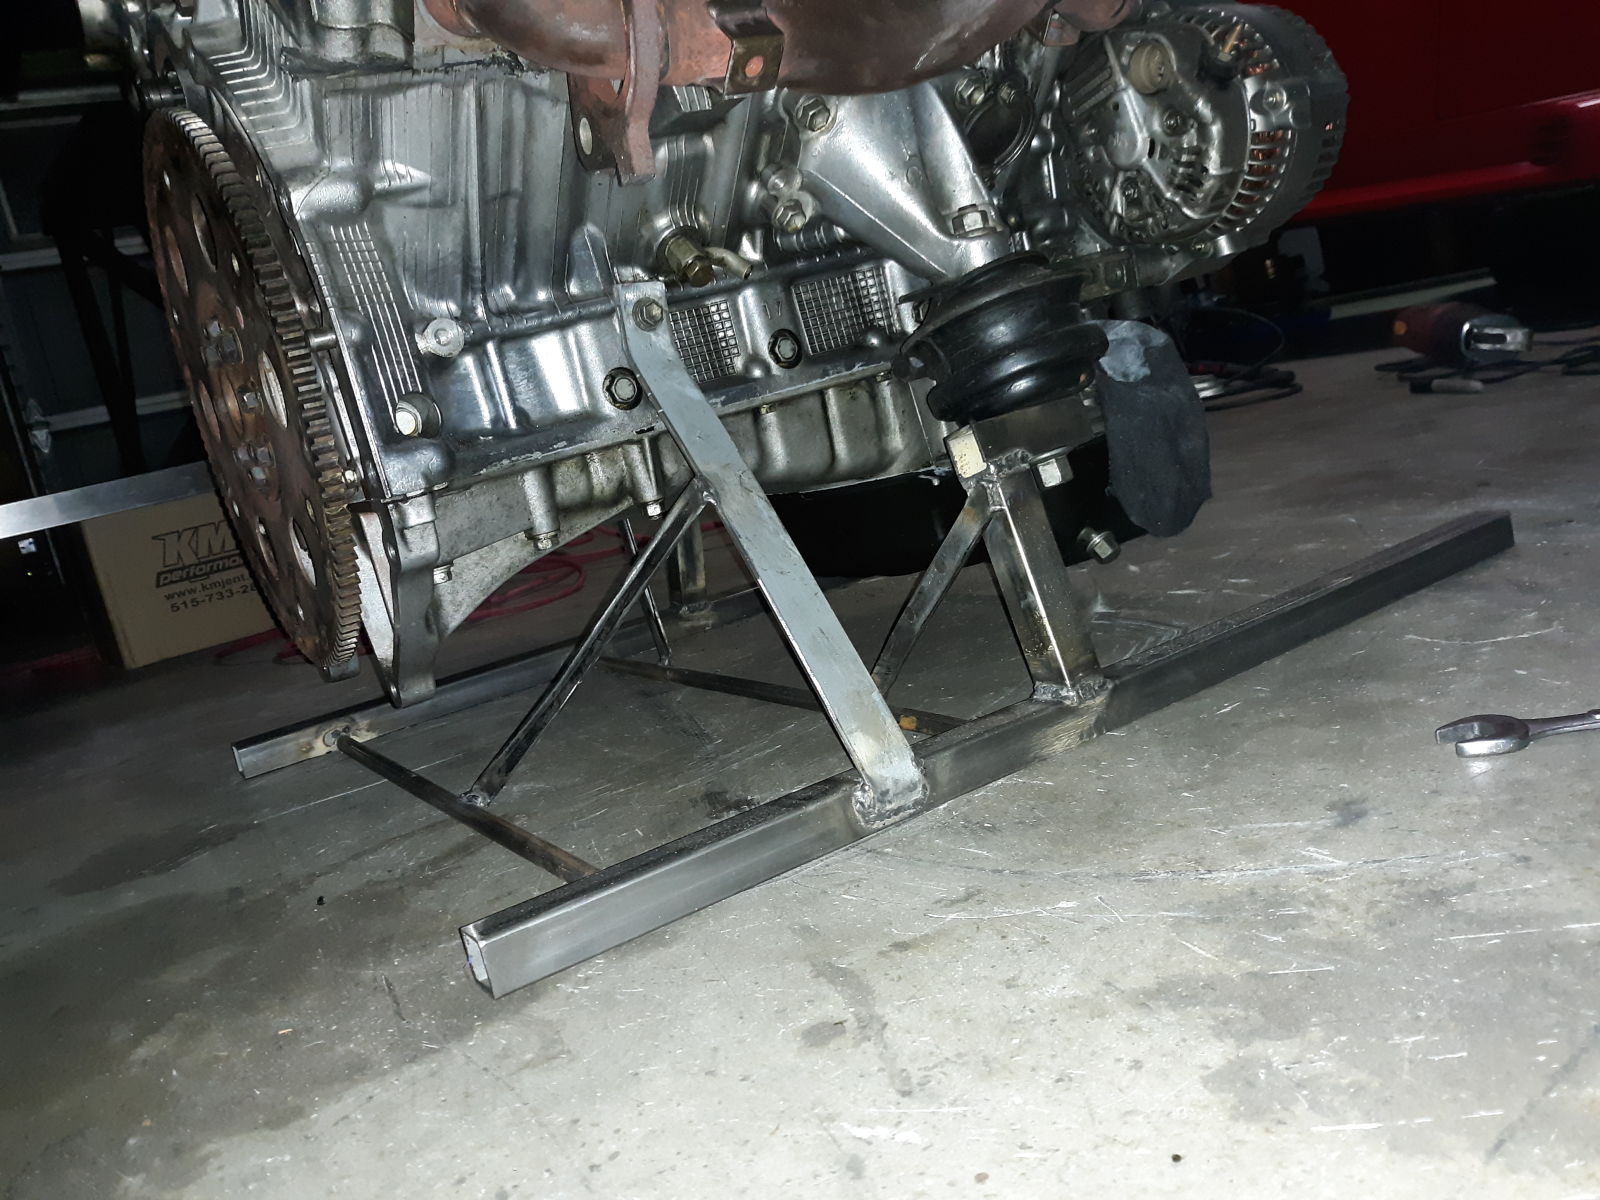 The extra bands are strips of sc400 subframe that got notched out long ago